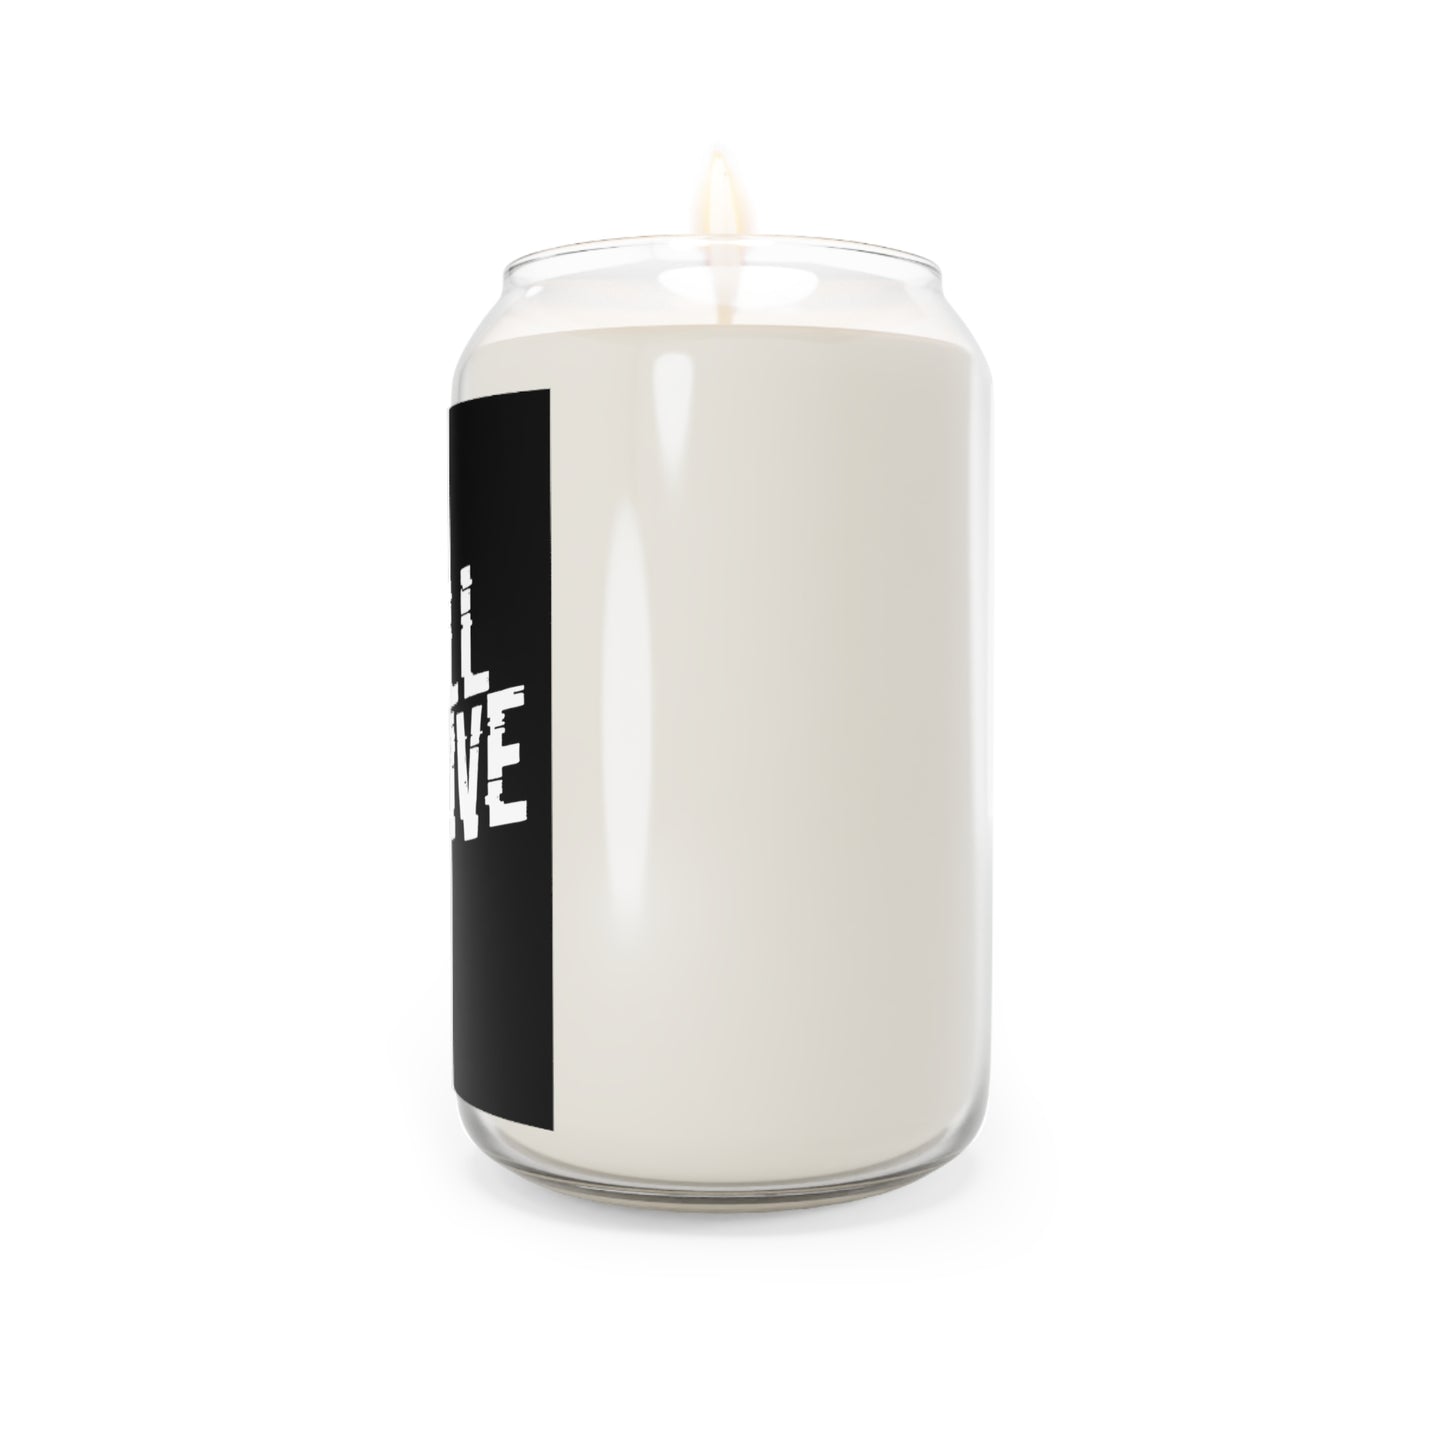 I WILL SURVIVE Candle